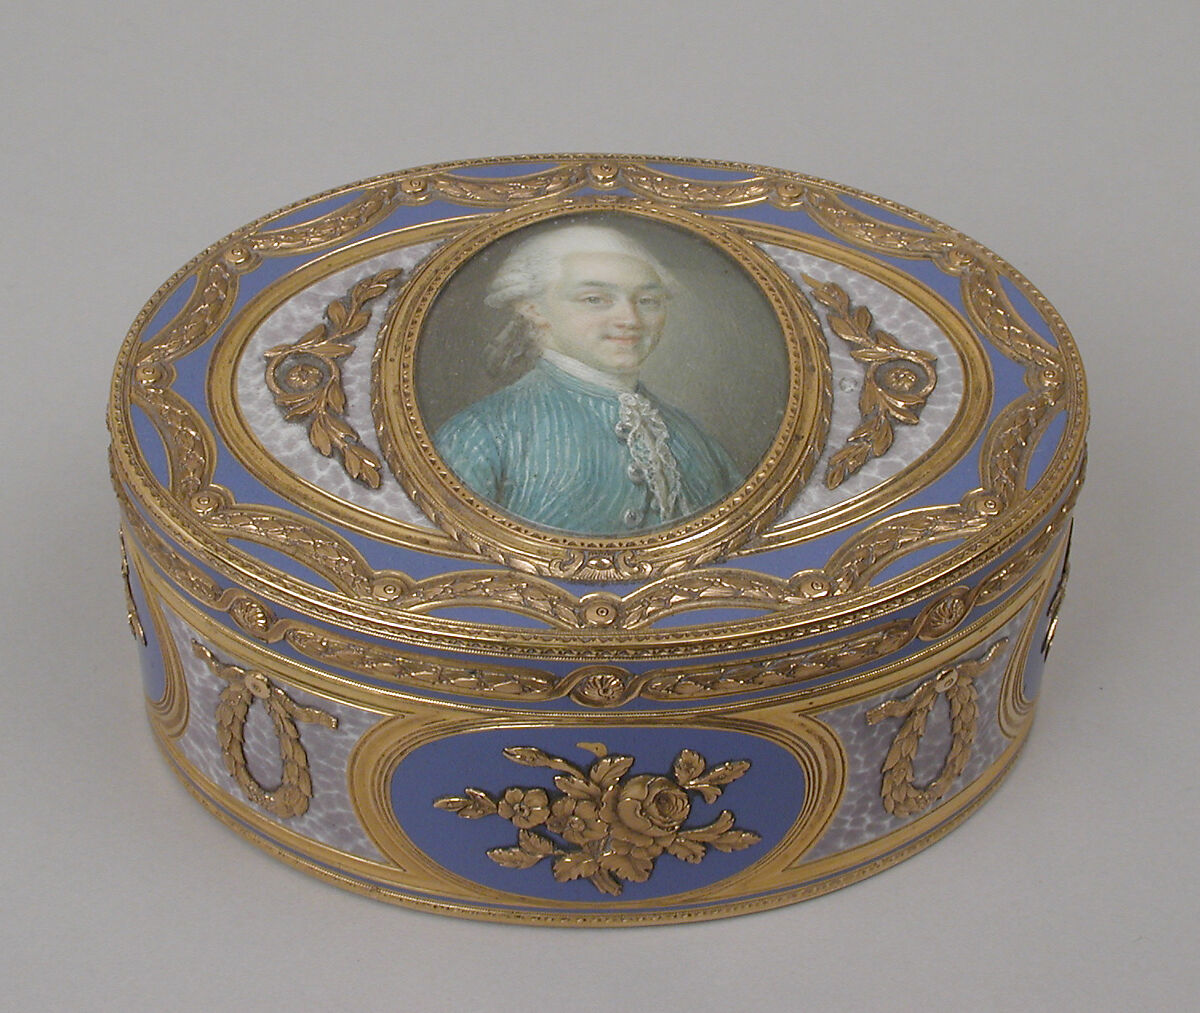 Snuffbox, Charles Le Bastier (French, apprenticed 1738, master 1754, active 1783), Gold, enamel, French, Paris 